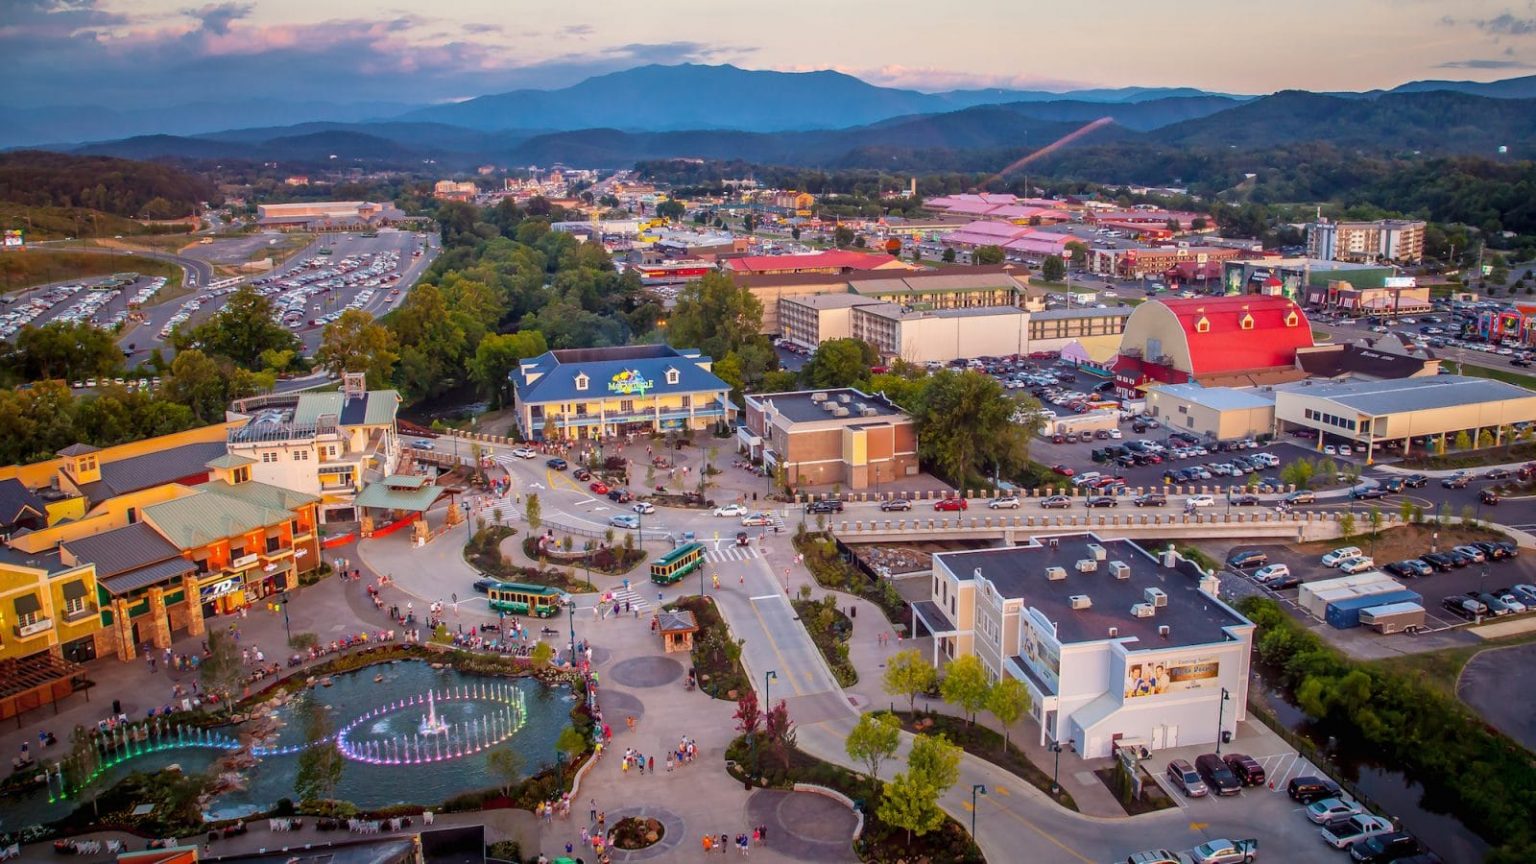 Best Place to Propose in Pigeon Forge, TN